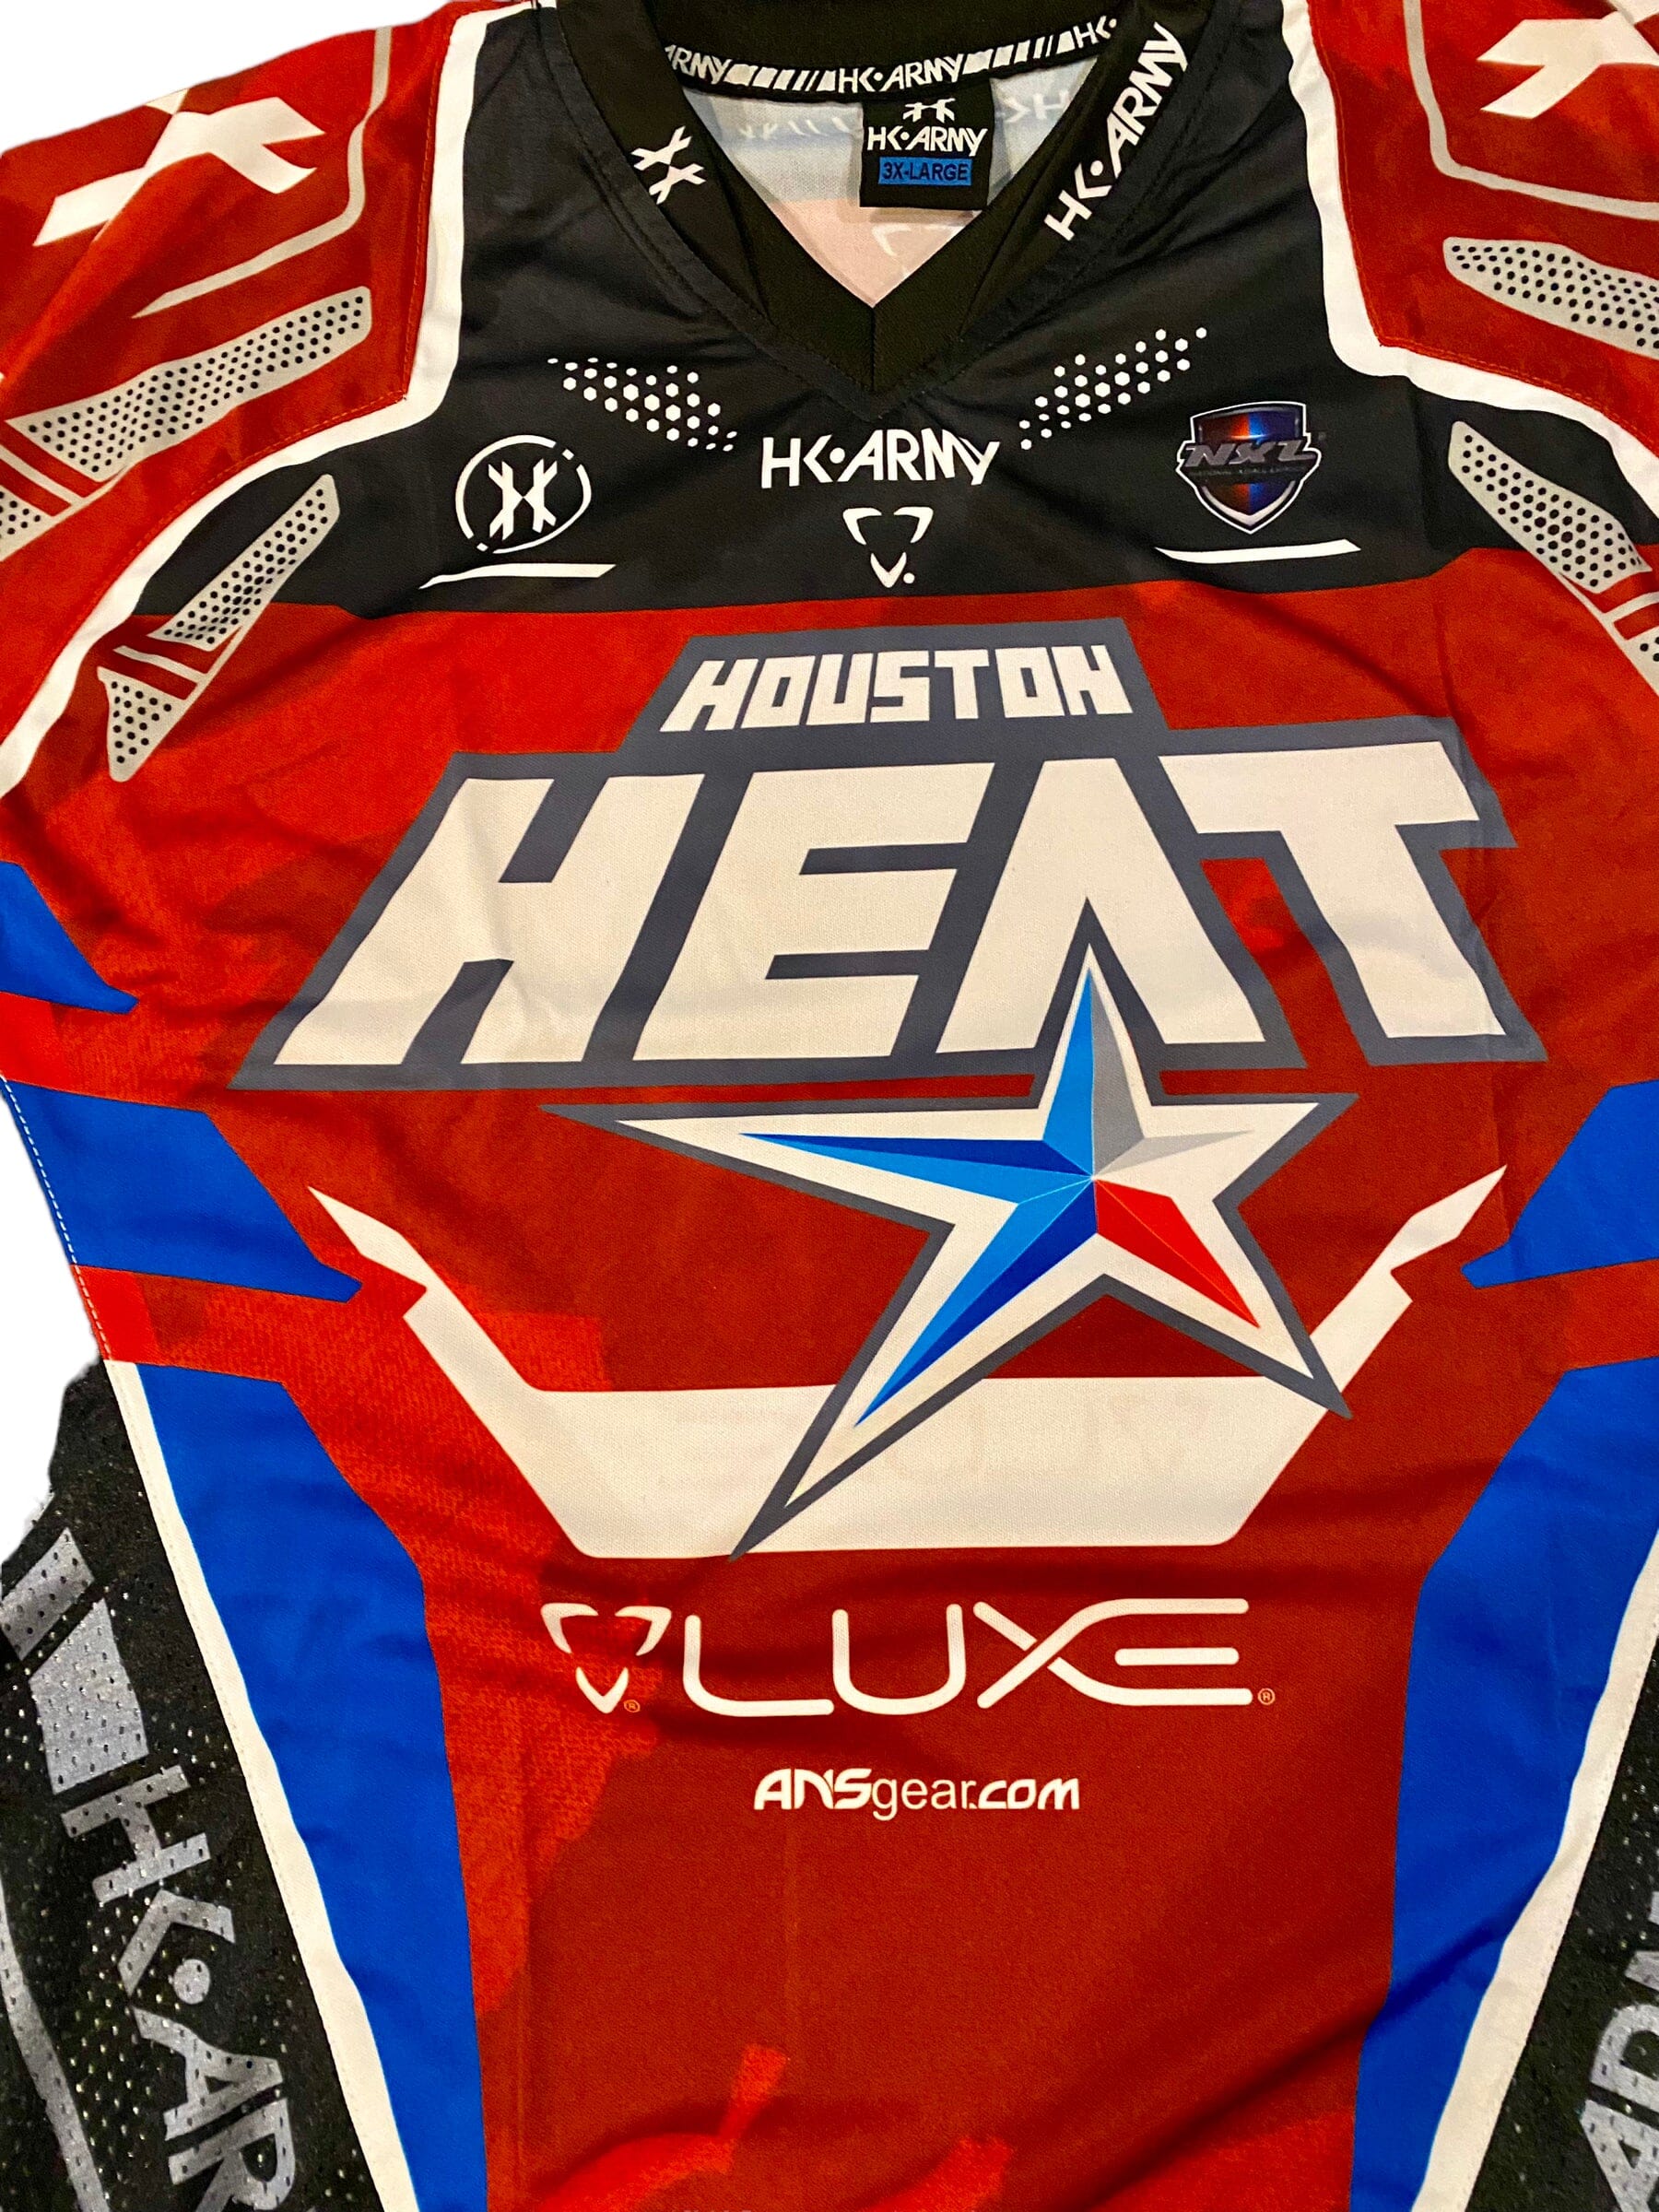 Used Houston Heat Pro Paintball Jersey size 3XL Paintball Gun from CPXBrosPaintball Buy/Sell/Trade Paintball Markers, Paintball Hoppers, Paintball Masks, and Hormesis Headbands